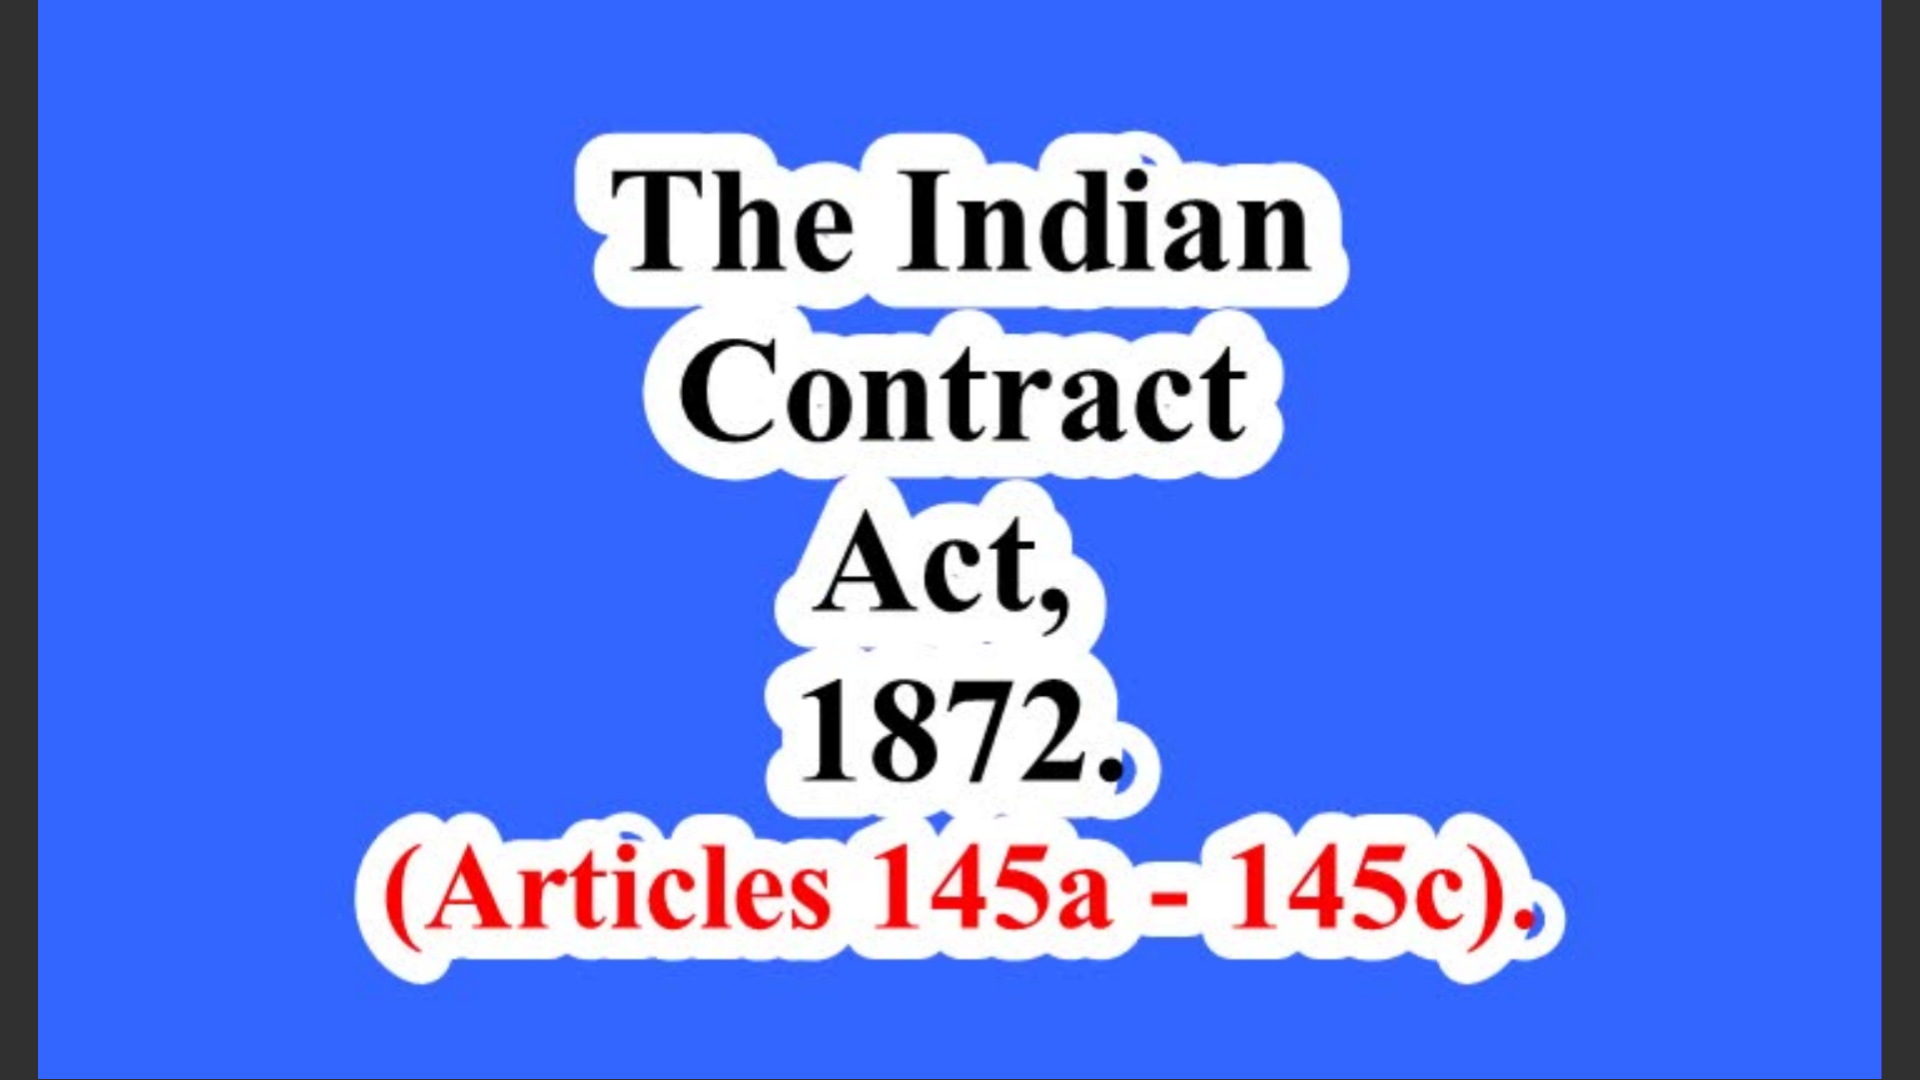 The Indian Contract Act, 1872. (Articles 145a – 145c).